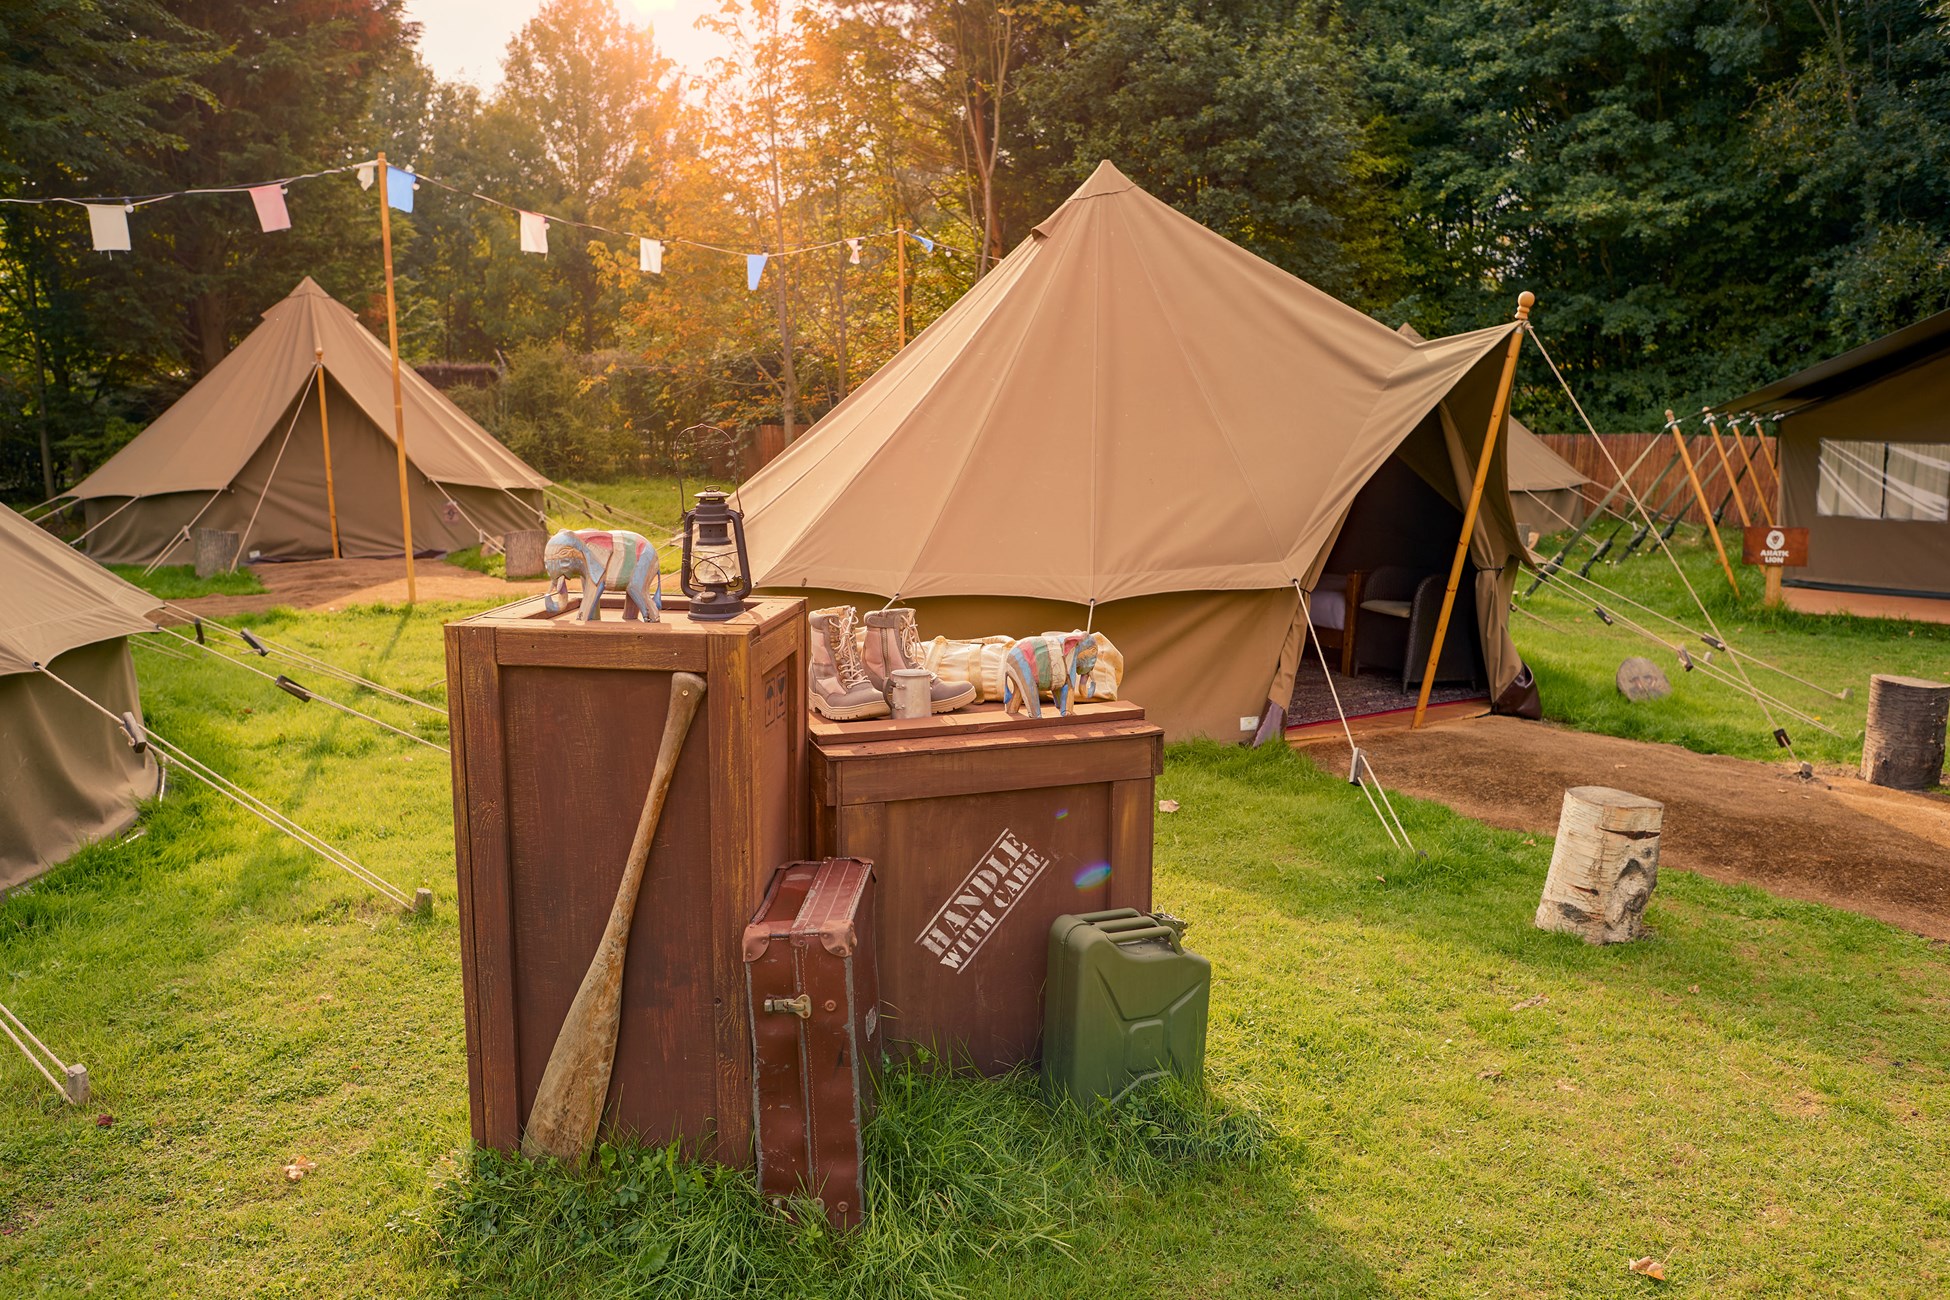 Glamping in our accessible tents at Chessington Resort